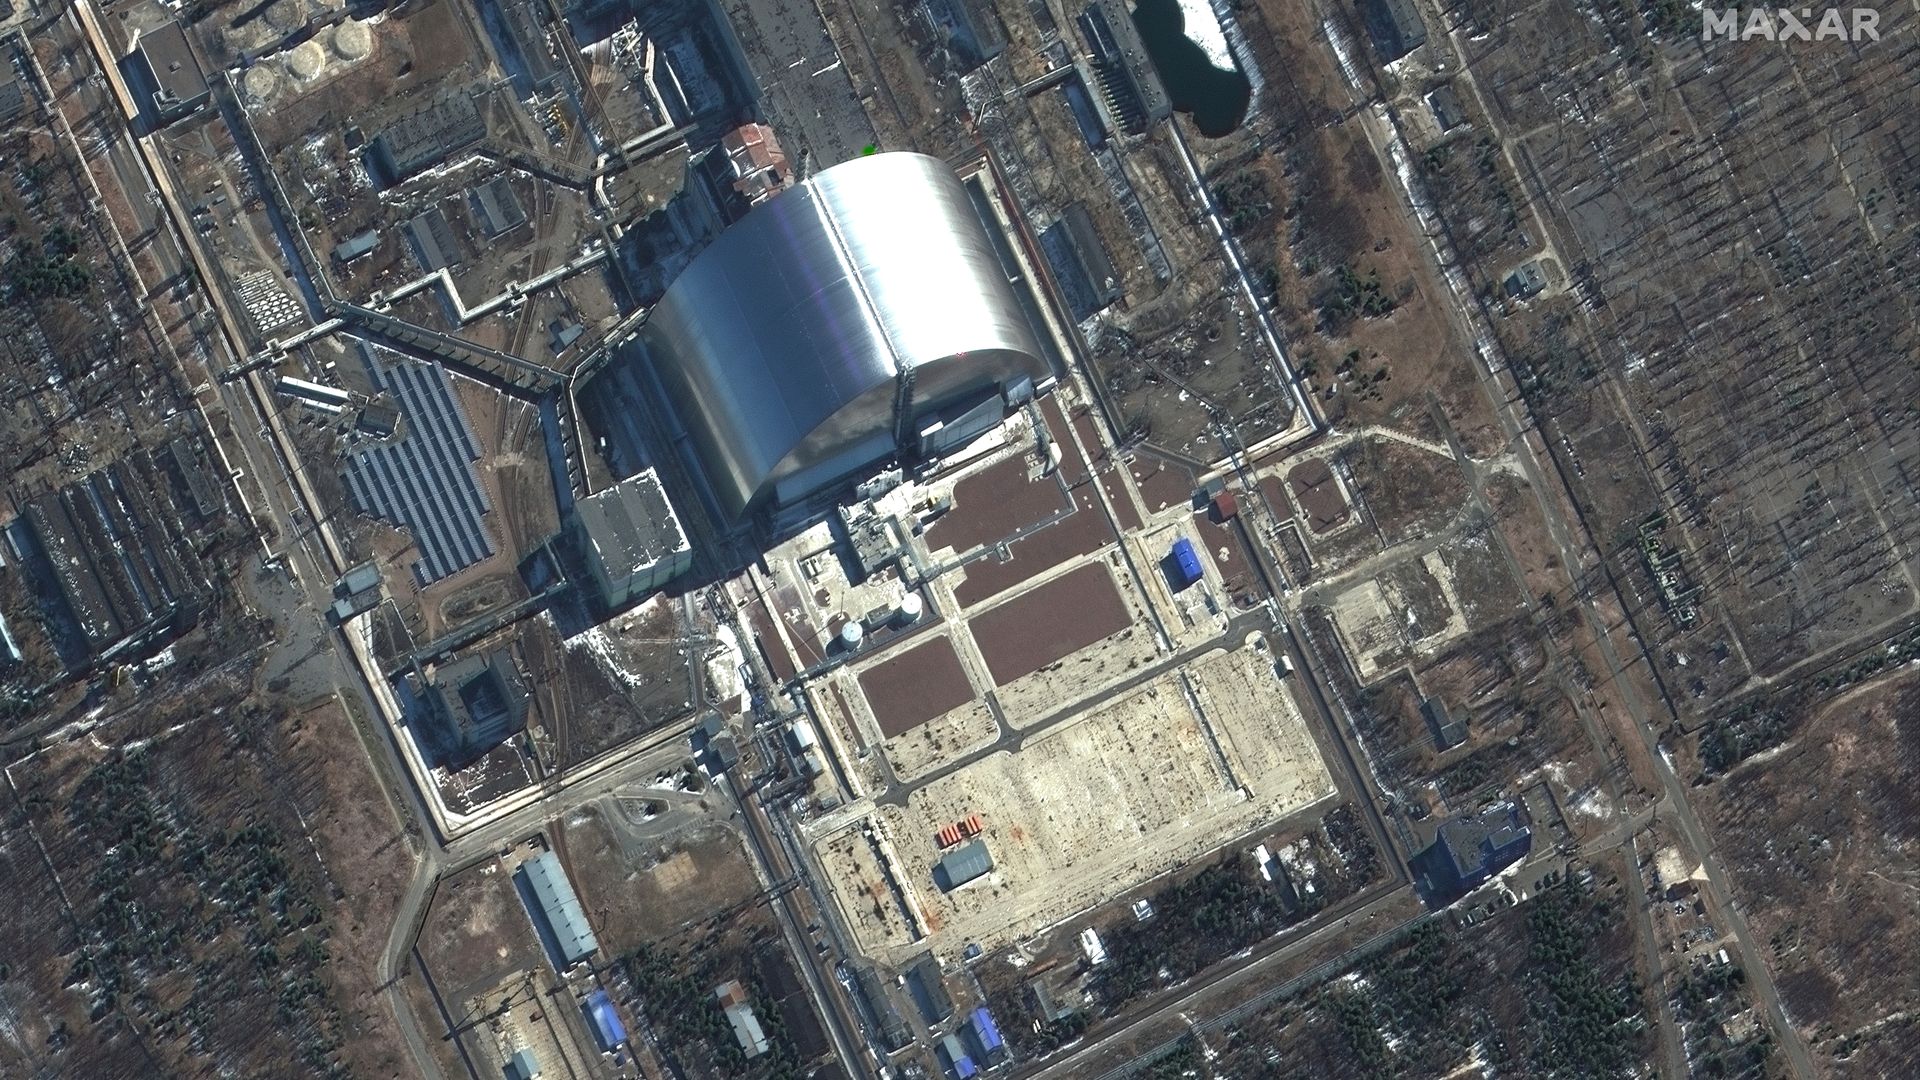 A satellite image captured on March 10 showing the Chernobyl Nuclear Power Plant in Ukraine.